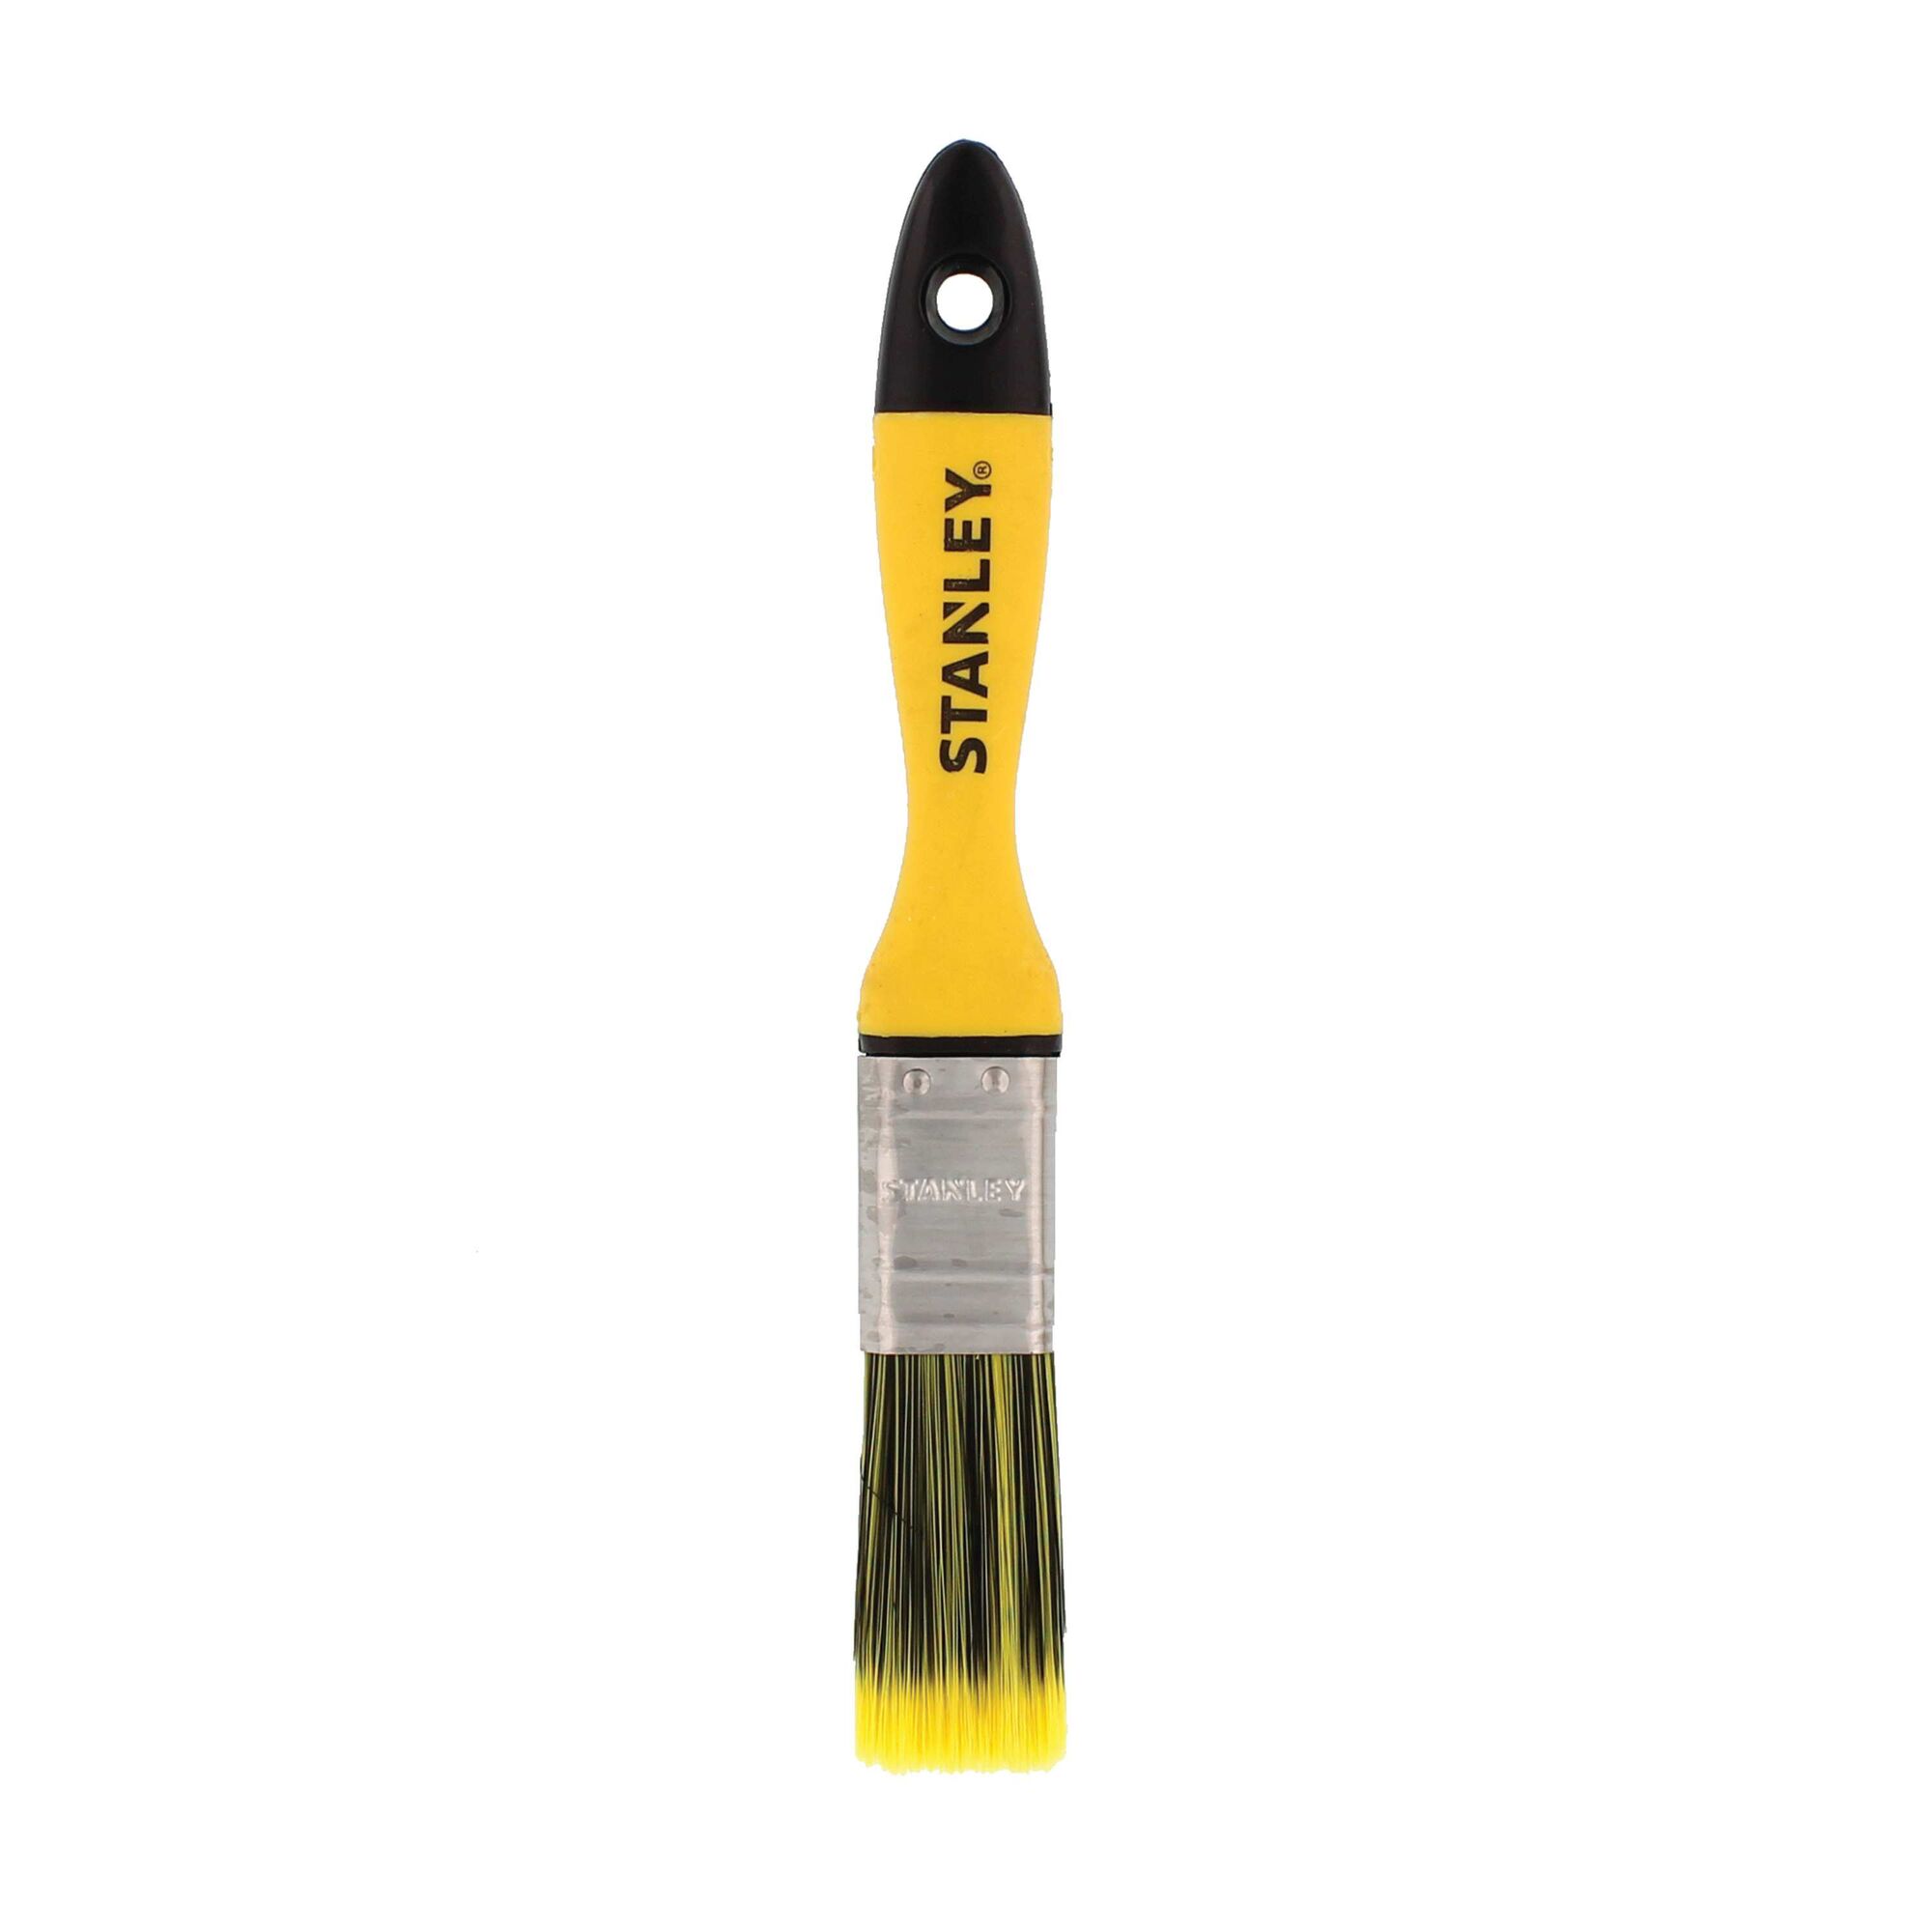 1/2in Stanley Tools Hobby Paint Brush 12mm - STPPYS0B 